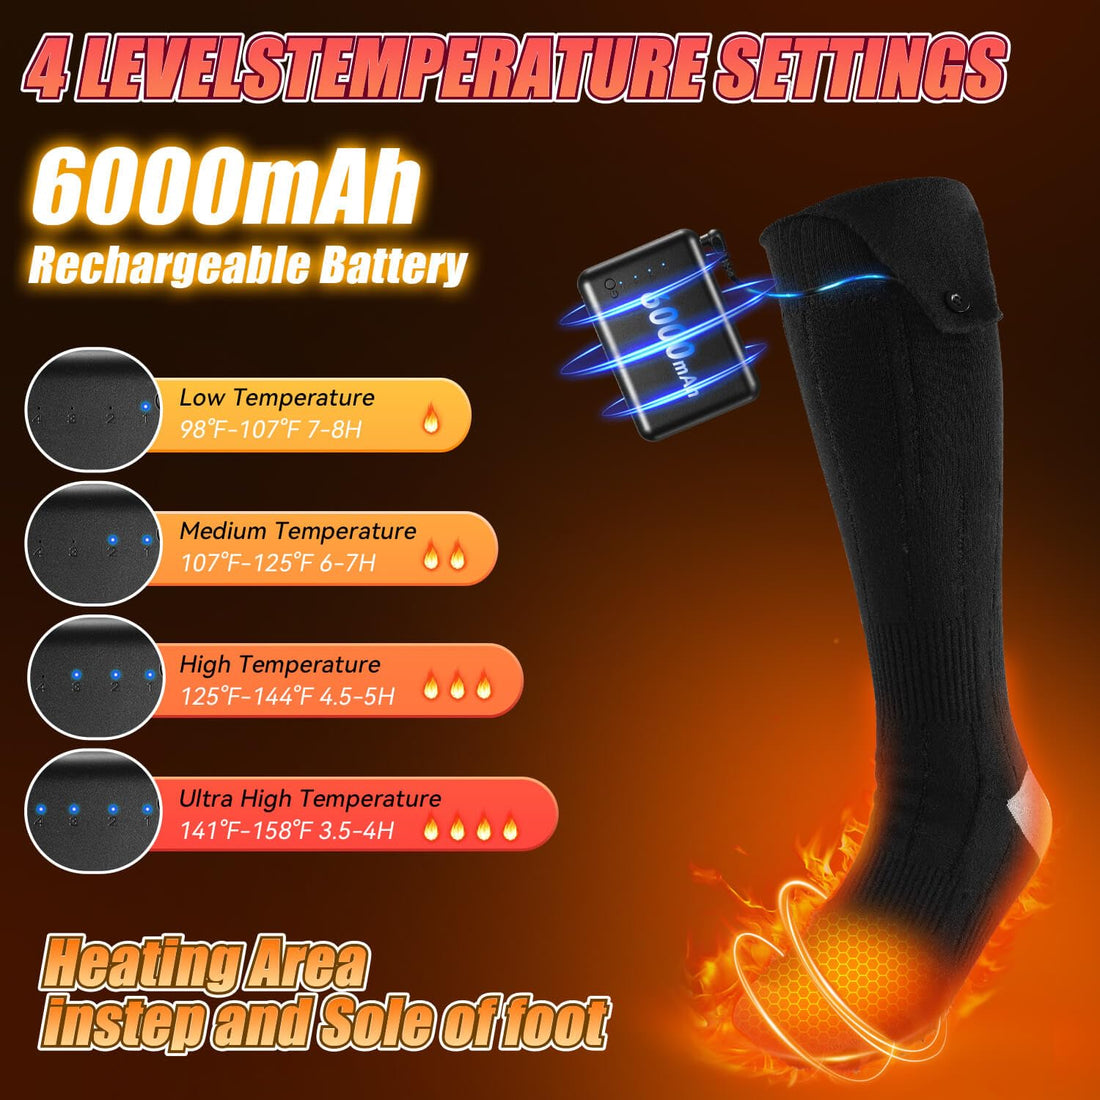 OZERO Electric Heated Socks for Men Women: 6000mAh Rechargeable Heating Socks with 360° Heating, 4 Heat Settings Washable Foot Warmer for Hunting Hiking Ski Camping, Black/X-Large